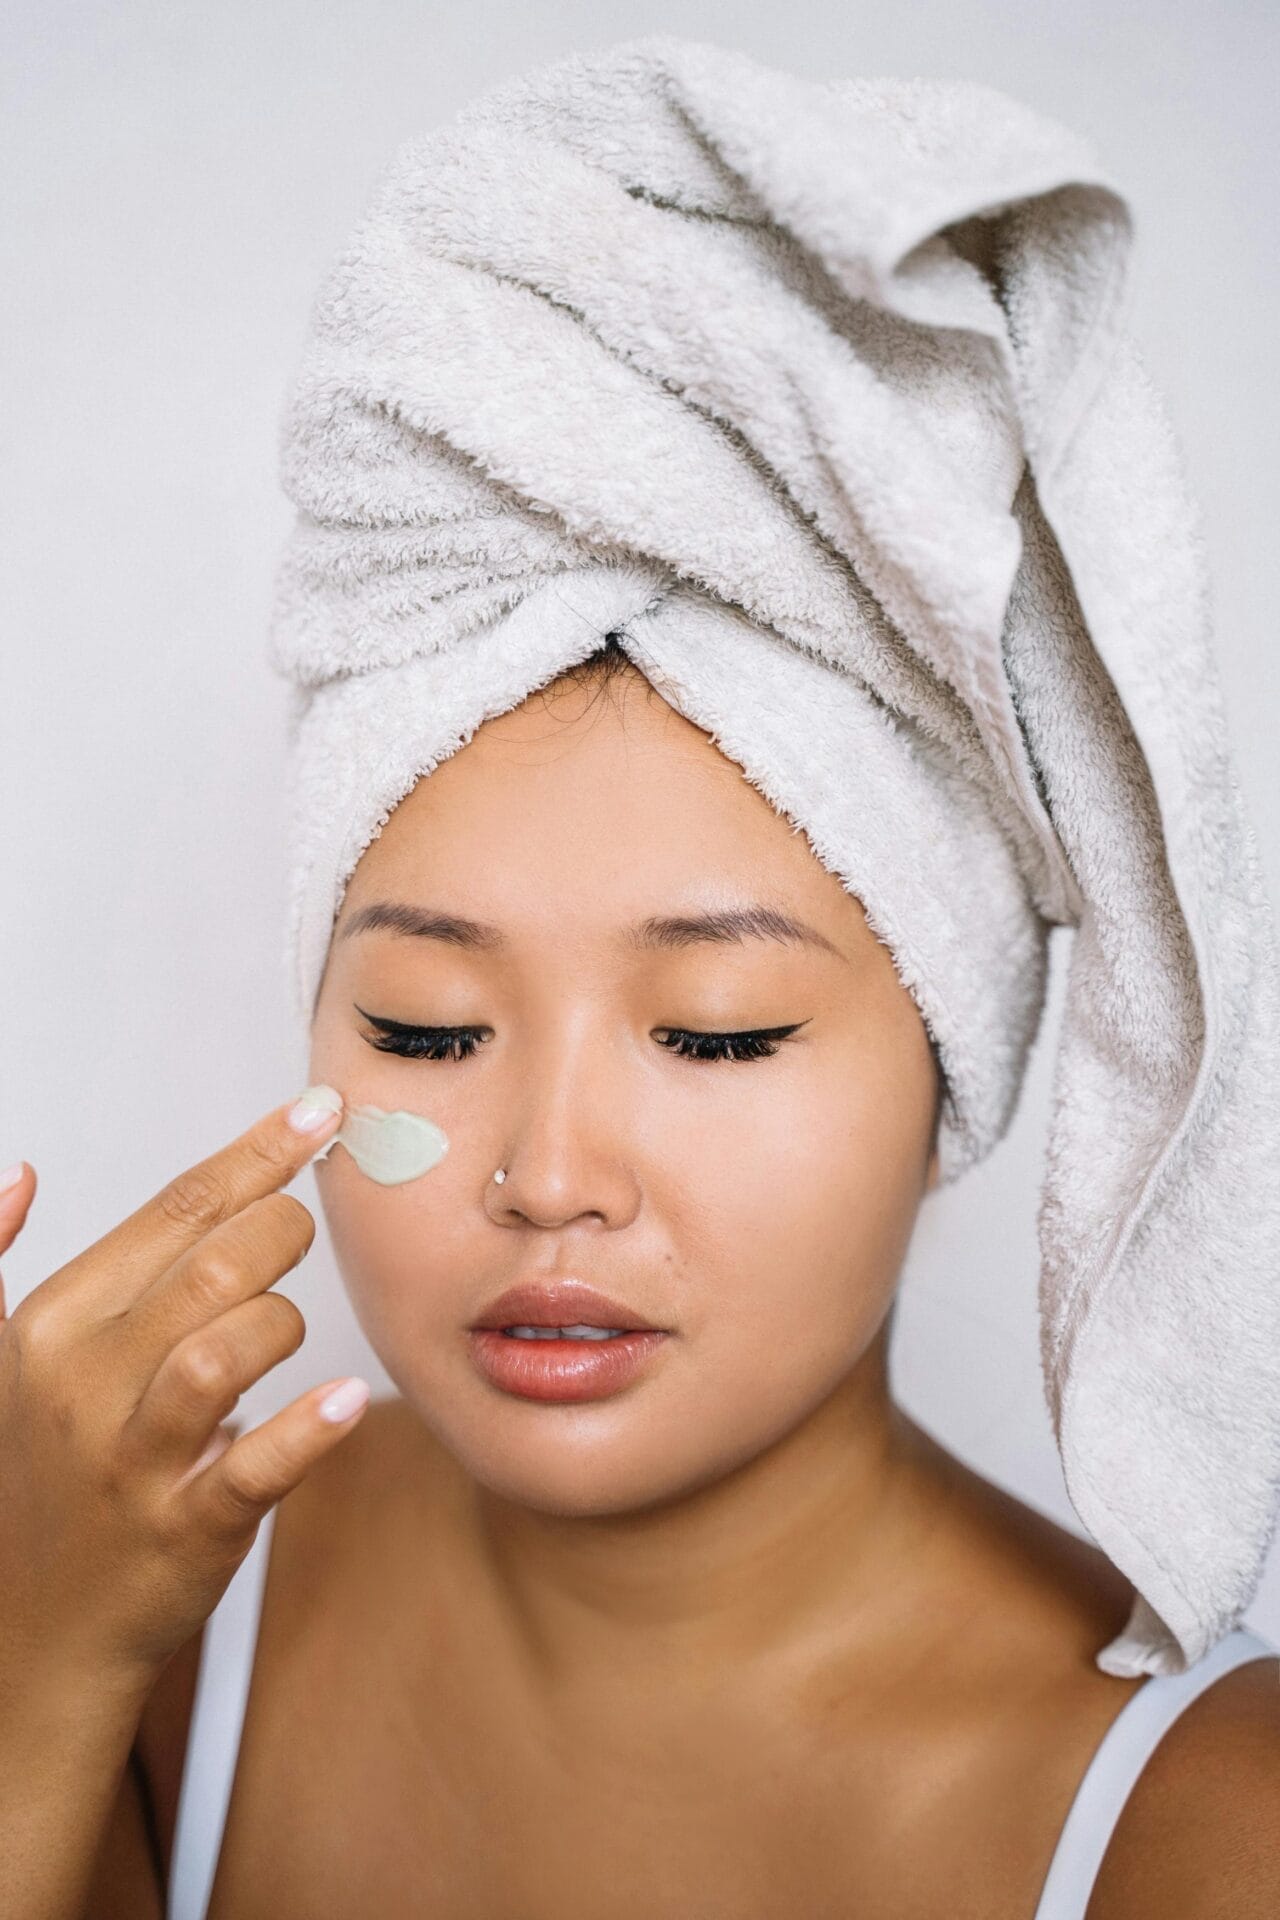 In winter, a woman with a towel on her head is preventing dry skin by applying cream to her face.